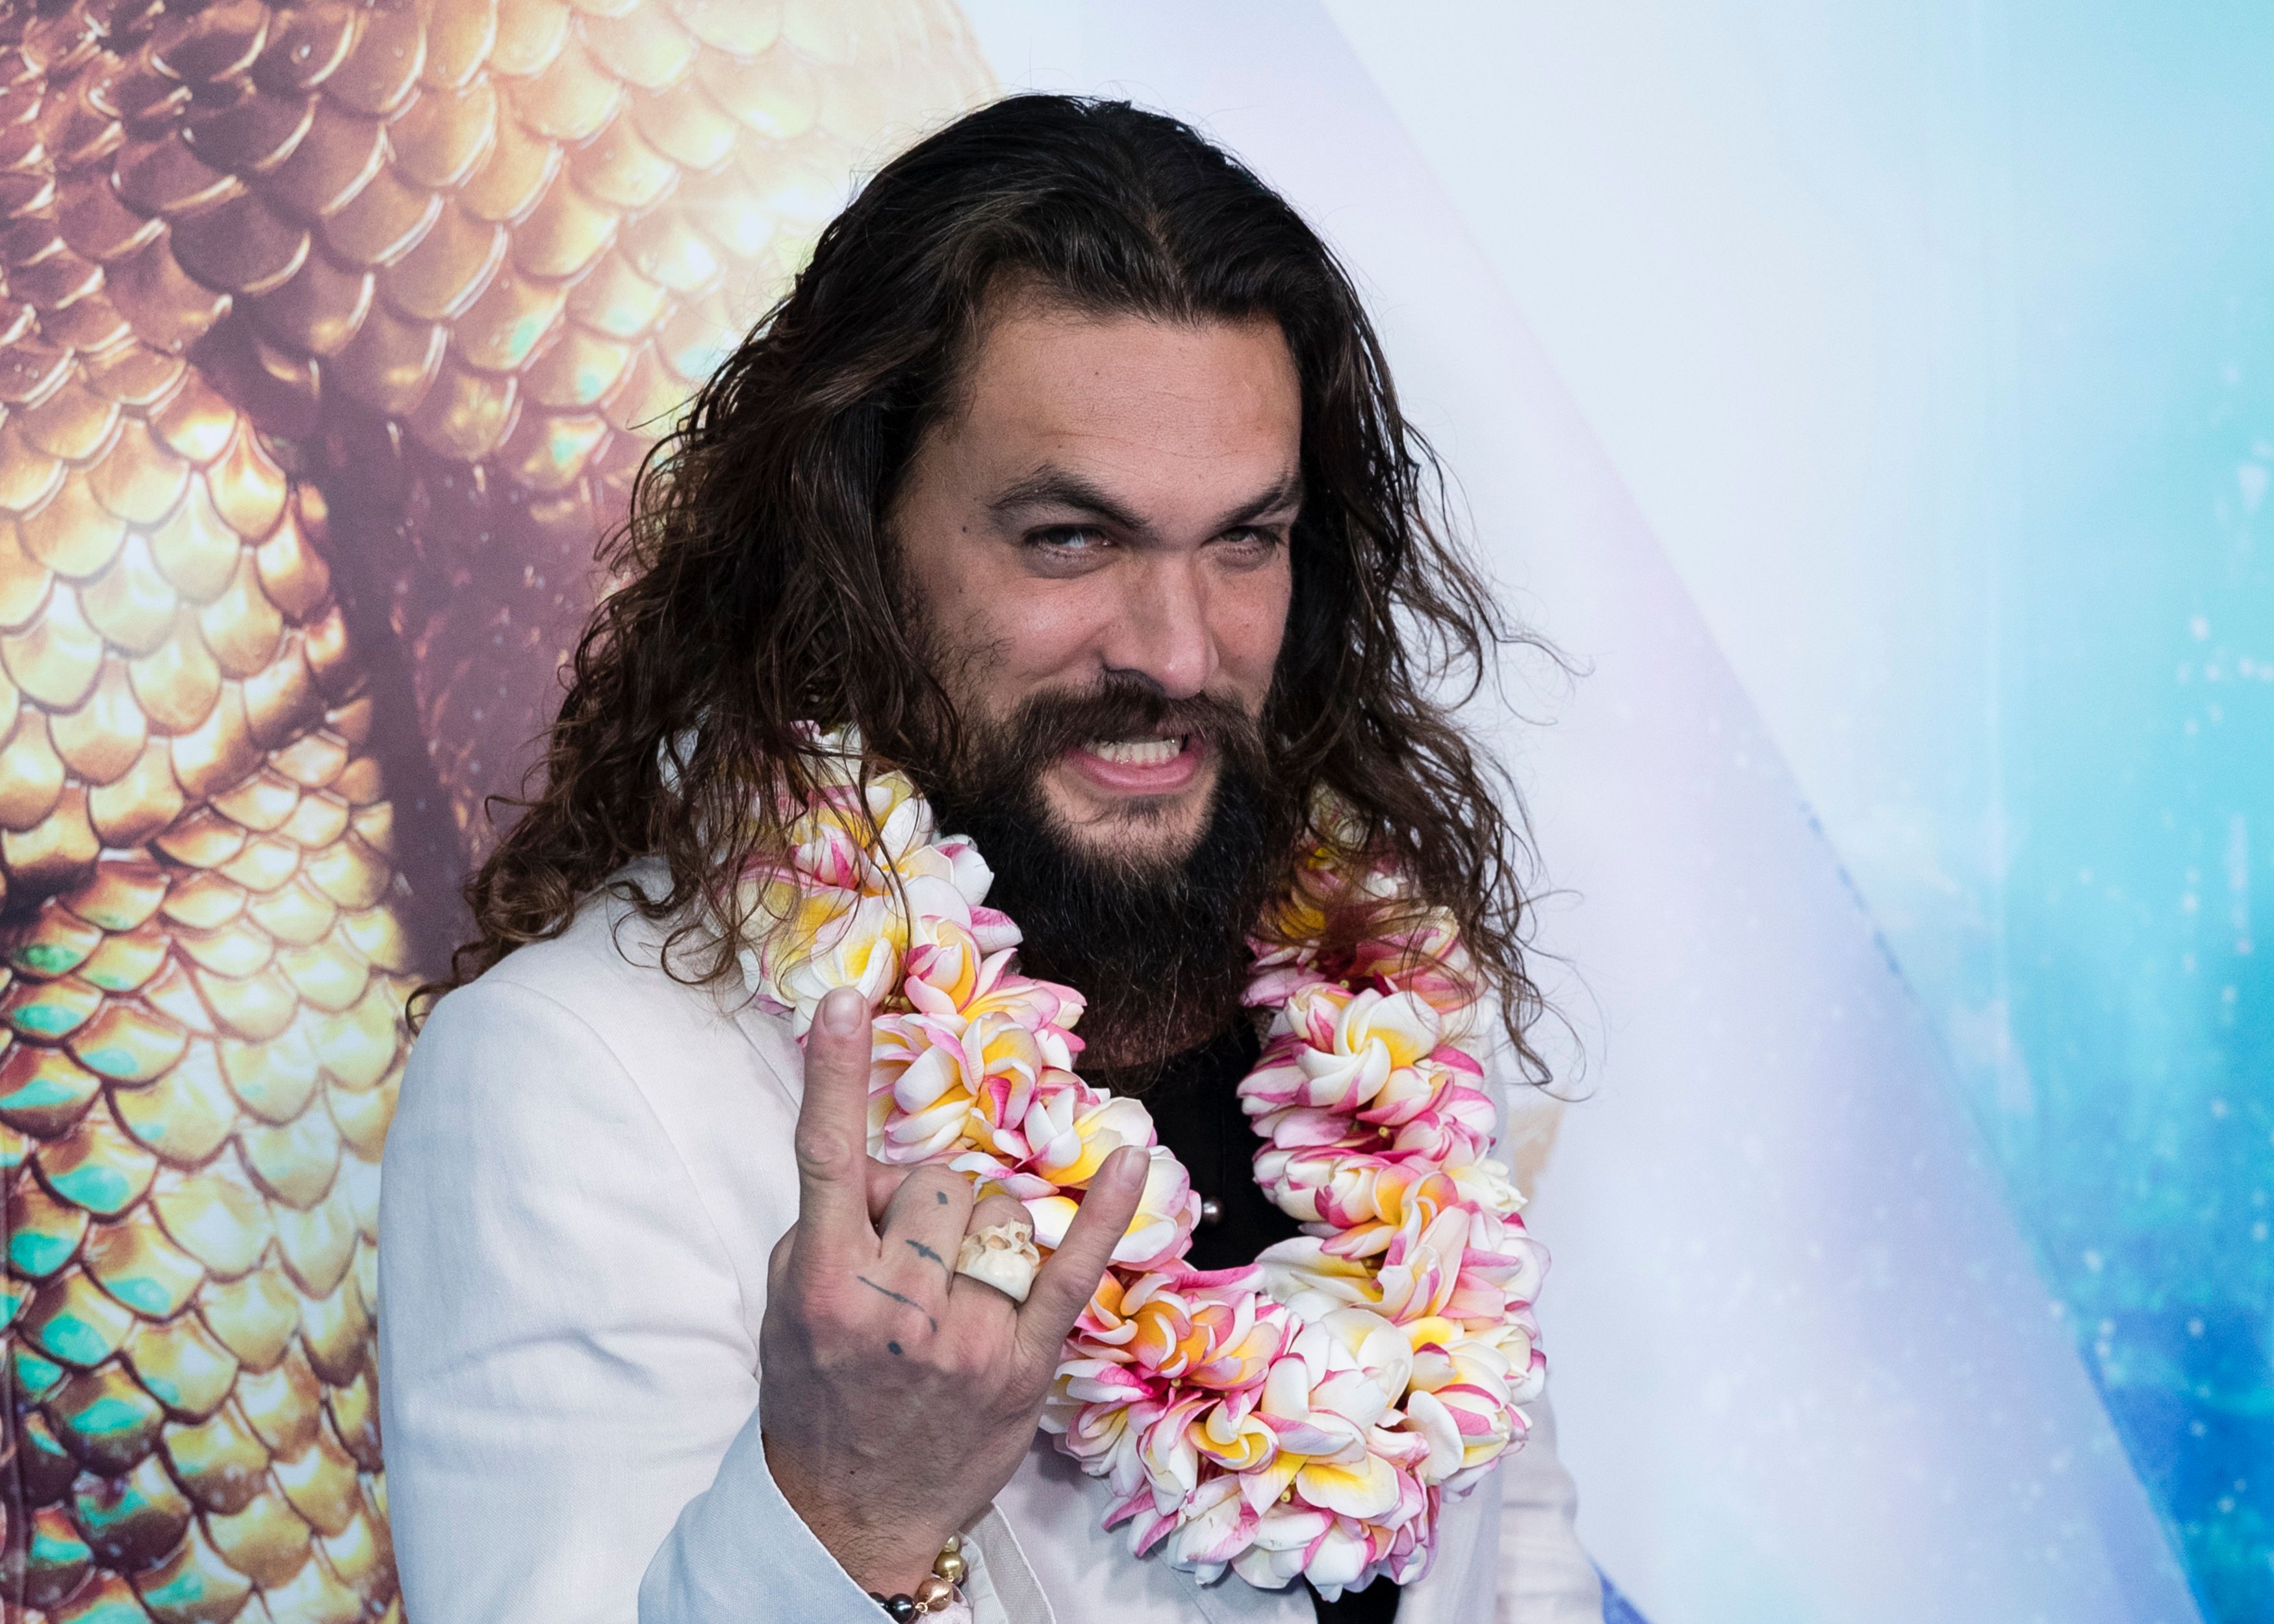 Jason Momoa at the Aquaman Sydney Fan Event at Event Cinemas George Street in Sydney, Australia | Photo: Brook Mitchell/Getty Images